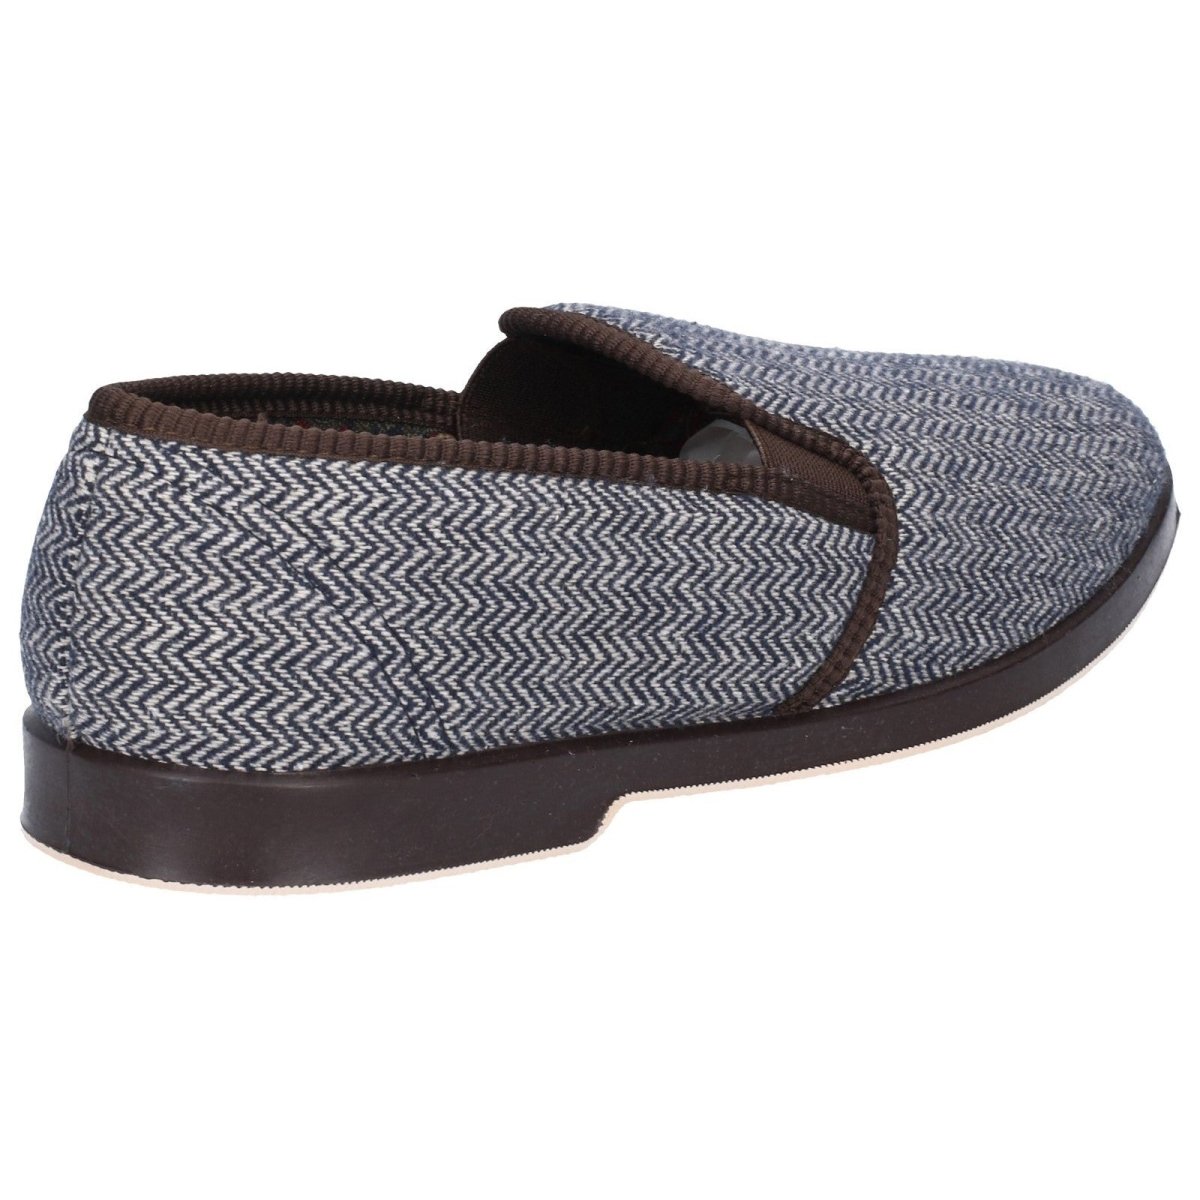 GBS Stafford Mens Warm British Twin Gusset Slippers - Shoe Store Direct